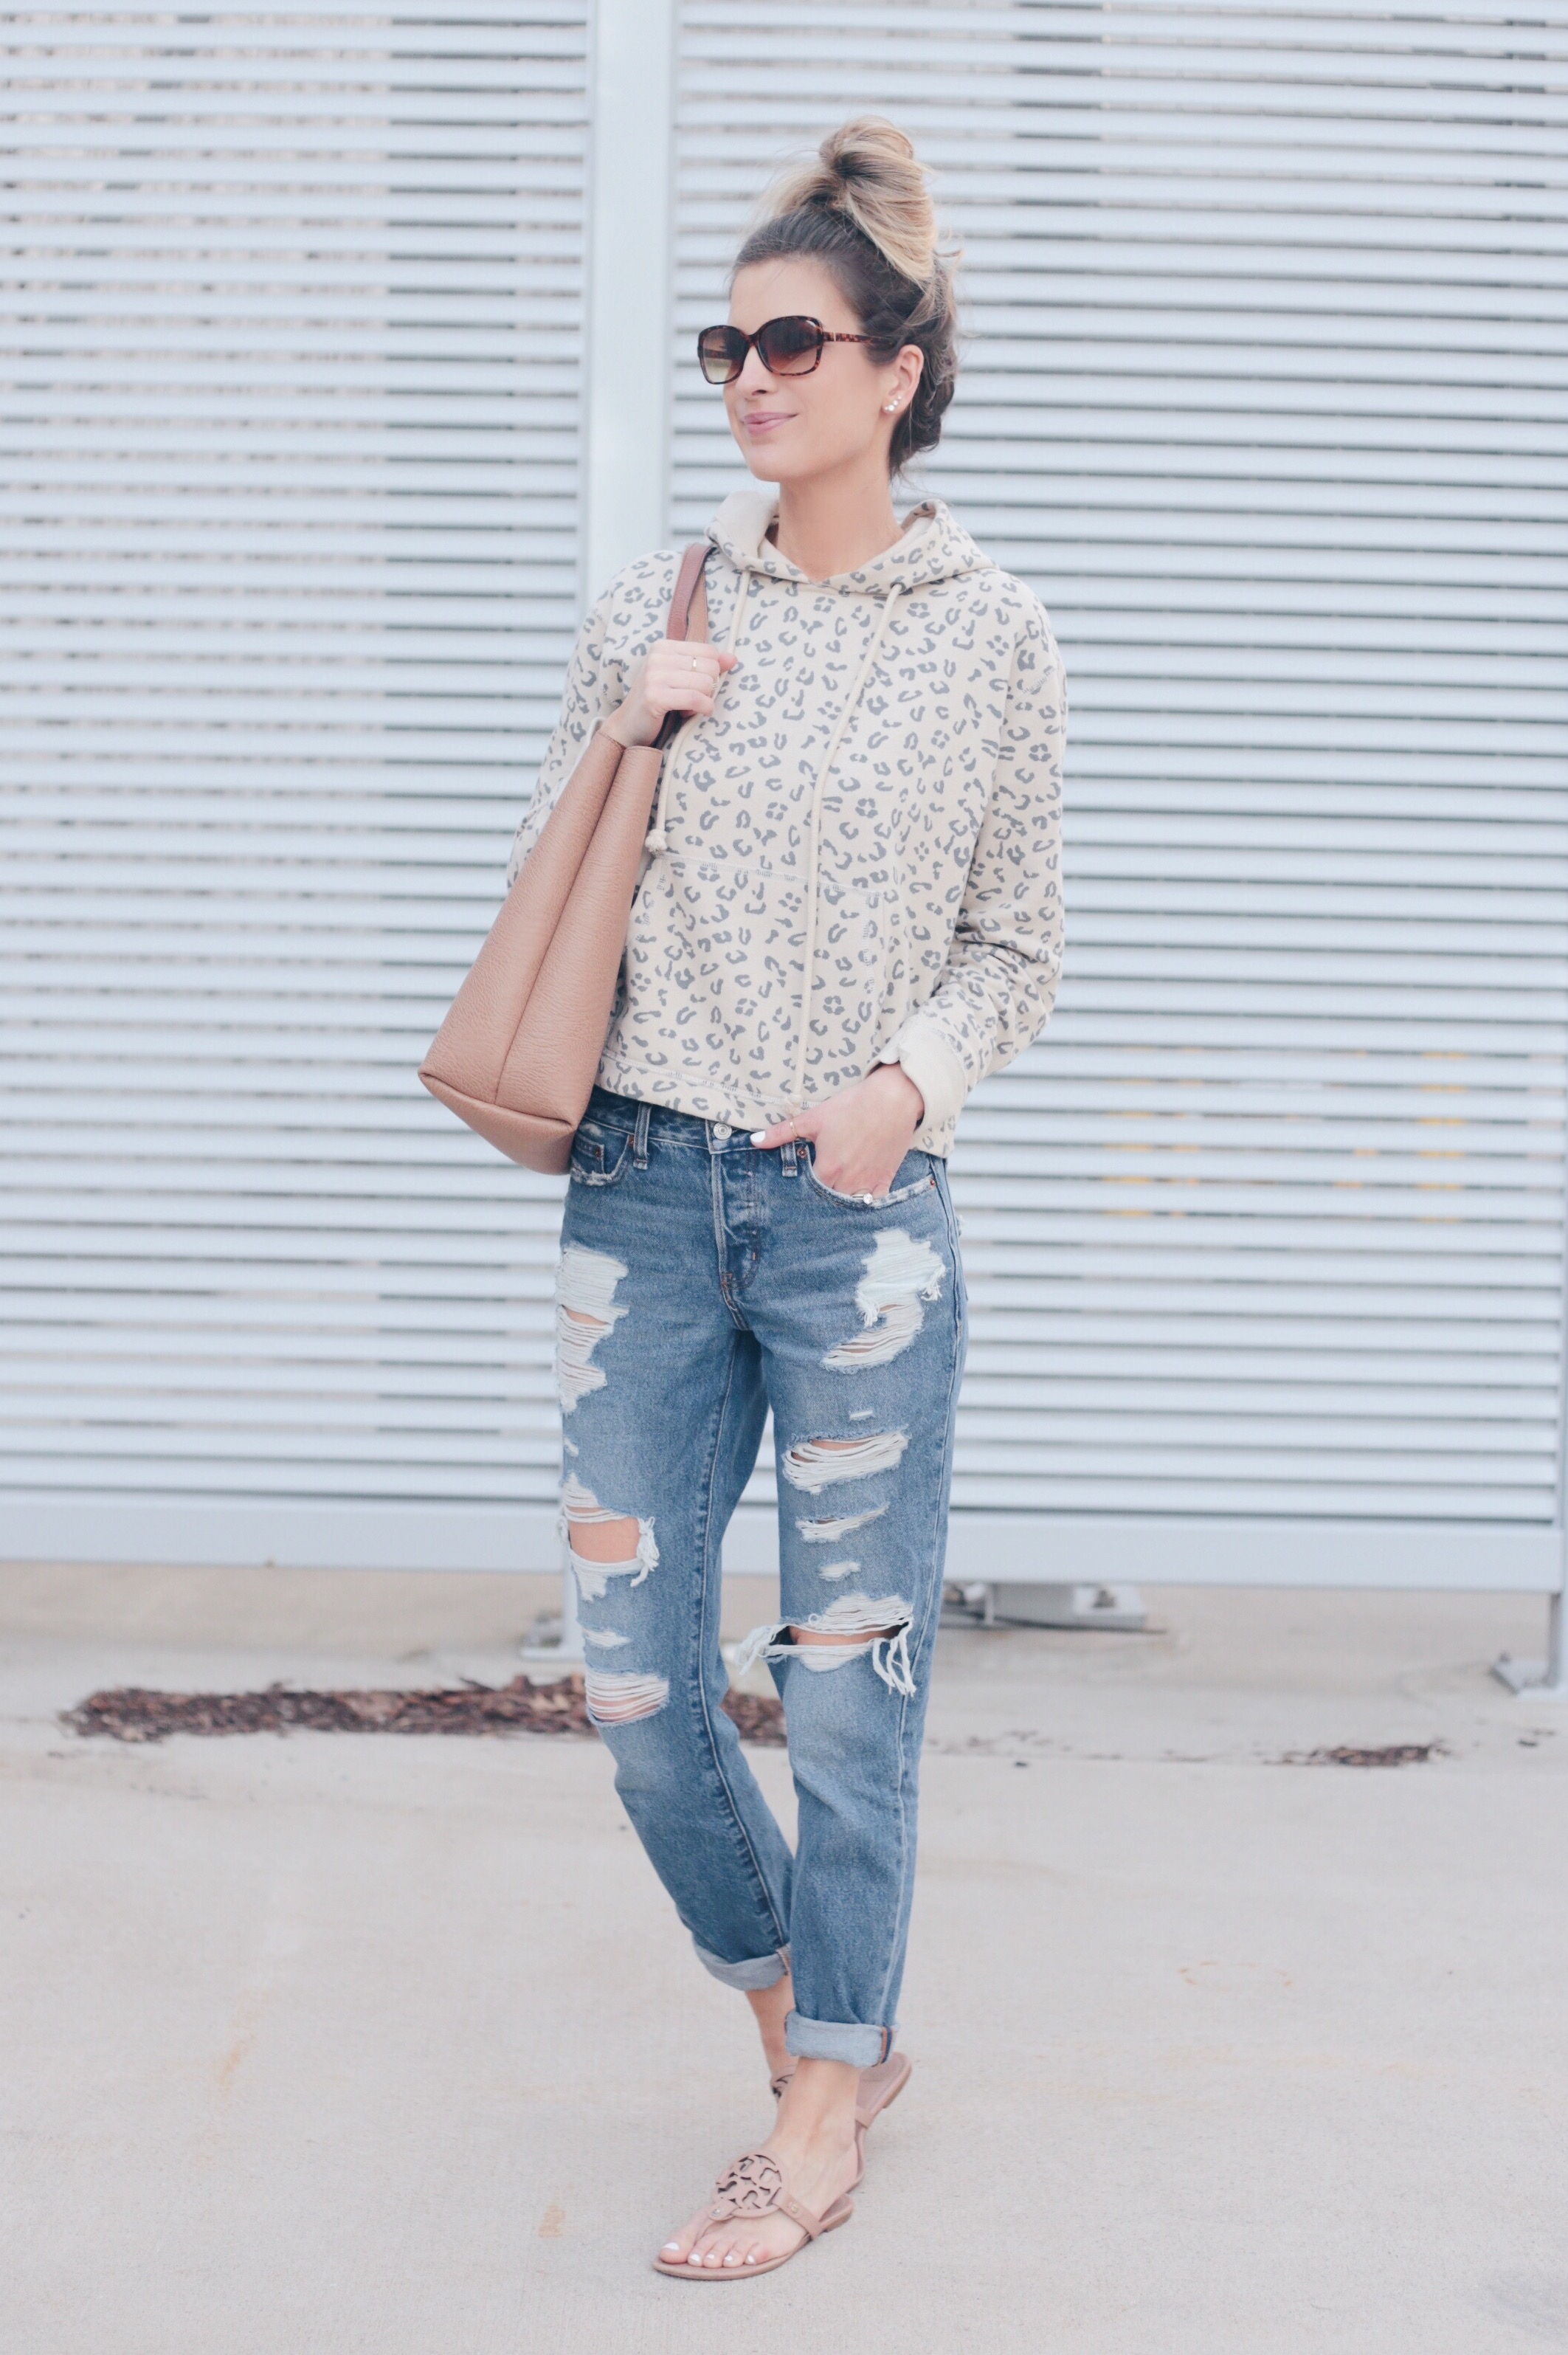  spring transition outfits with denim - boyfriend jeans outfit ideas on pinteresting plans blog